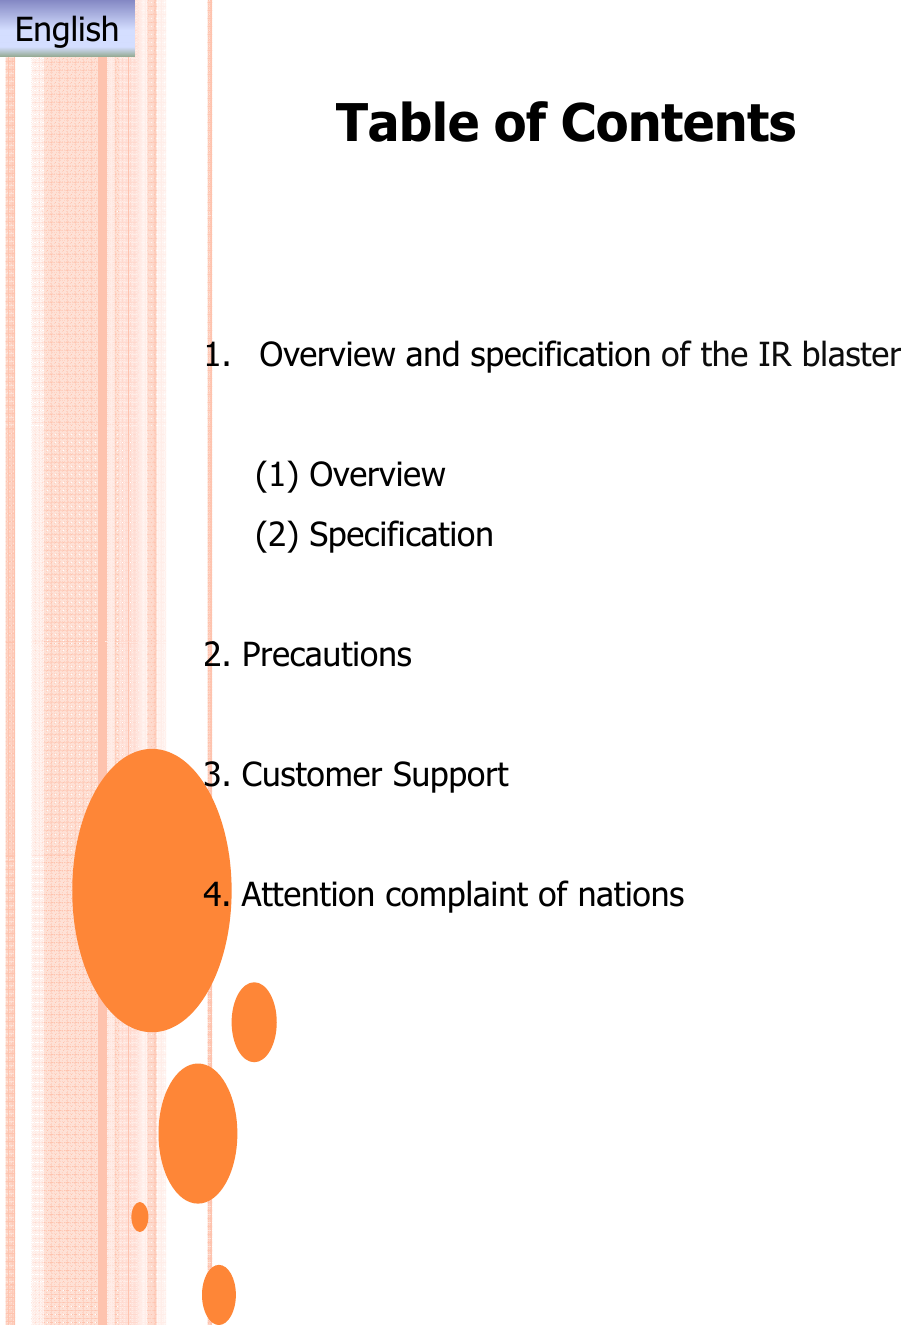 Table of ContentsEnglish1. Overview and specification of the IR blaster(1) Overview(2) Specification22. Precautions3. Customer Support4. Attention complaint of nations